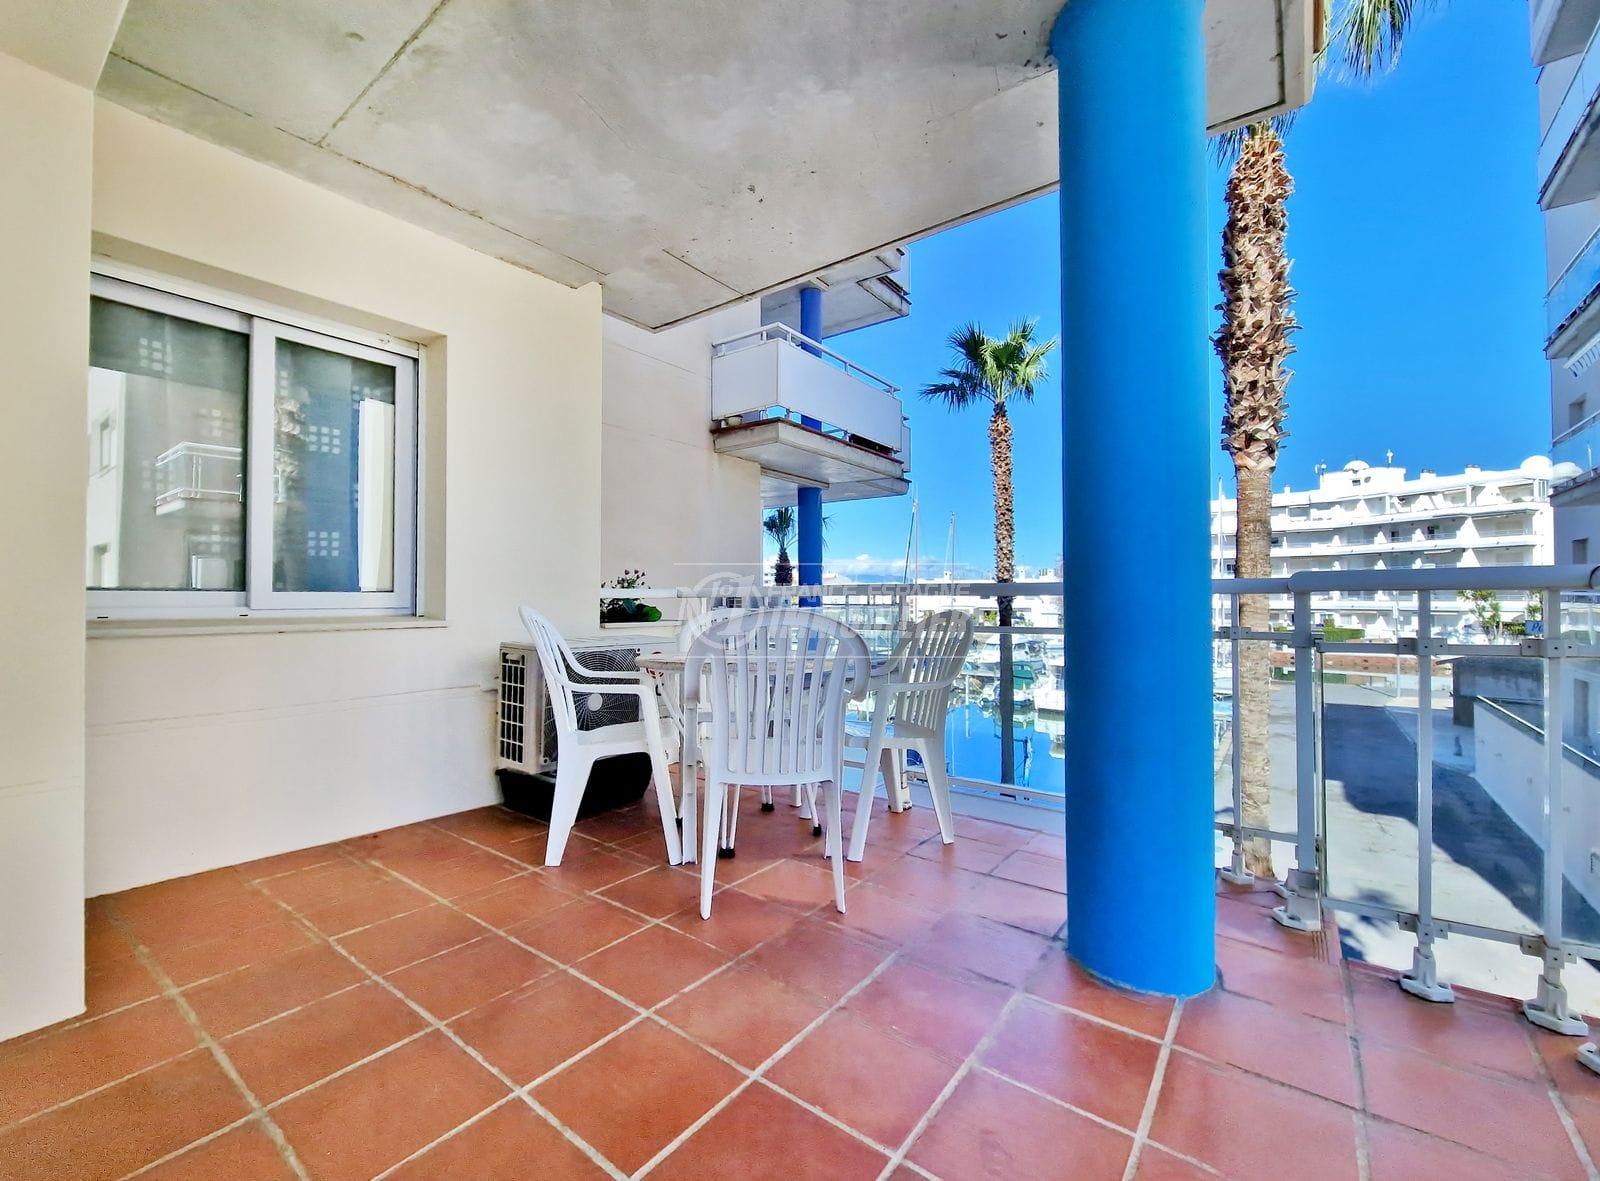 Exclusivity Roses - Flat terrace 10m² marina view, parking possible